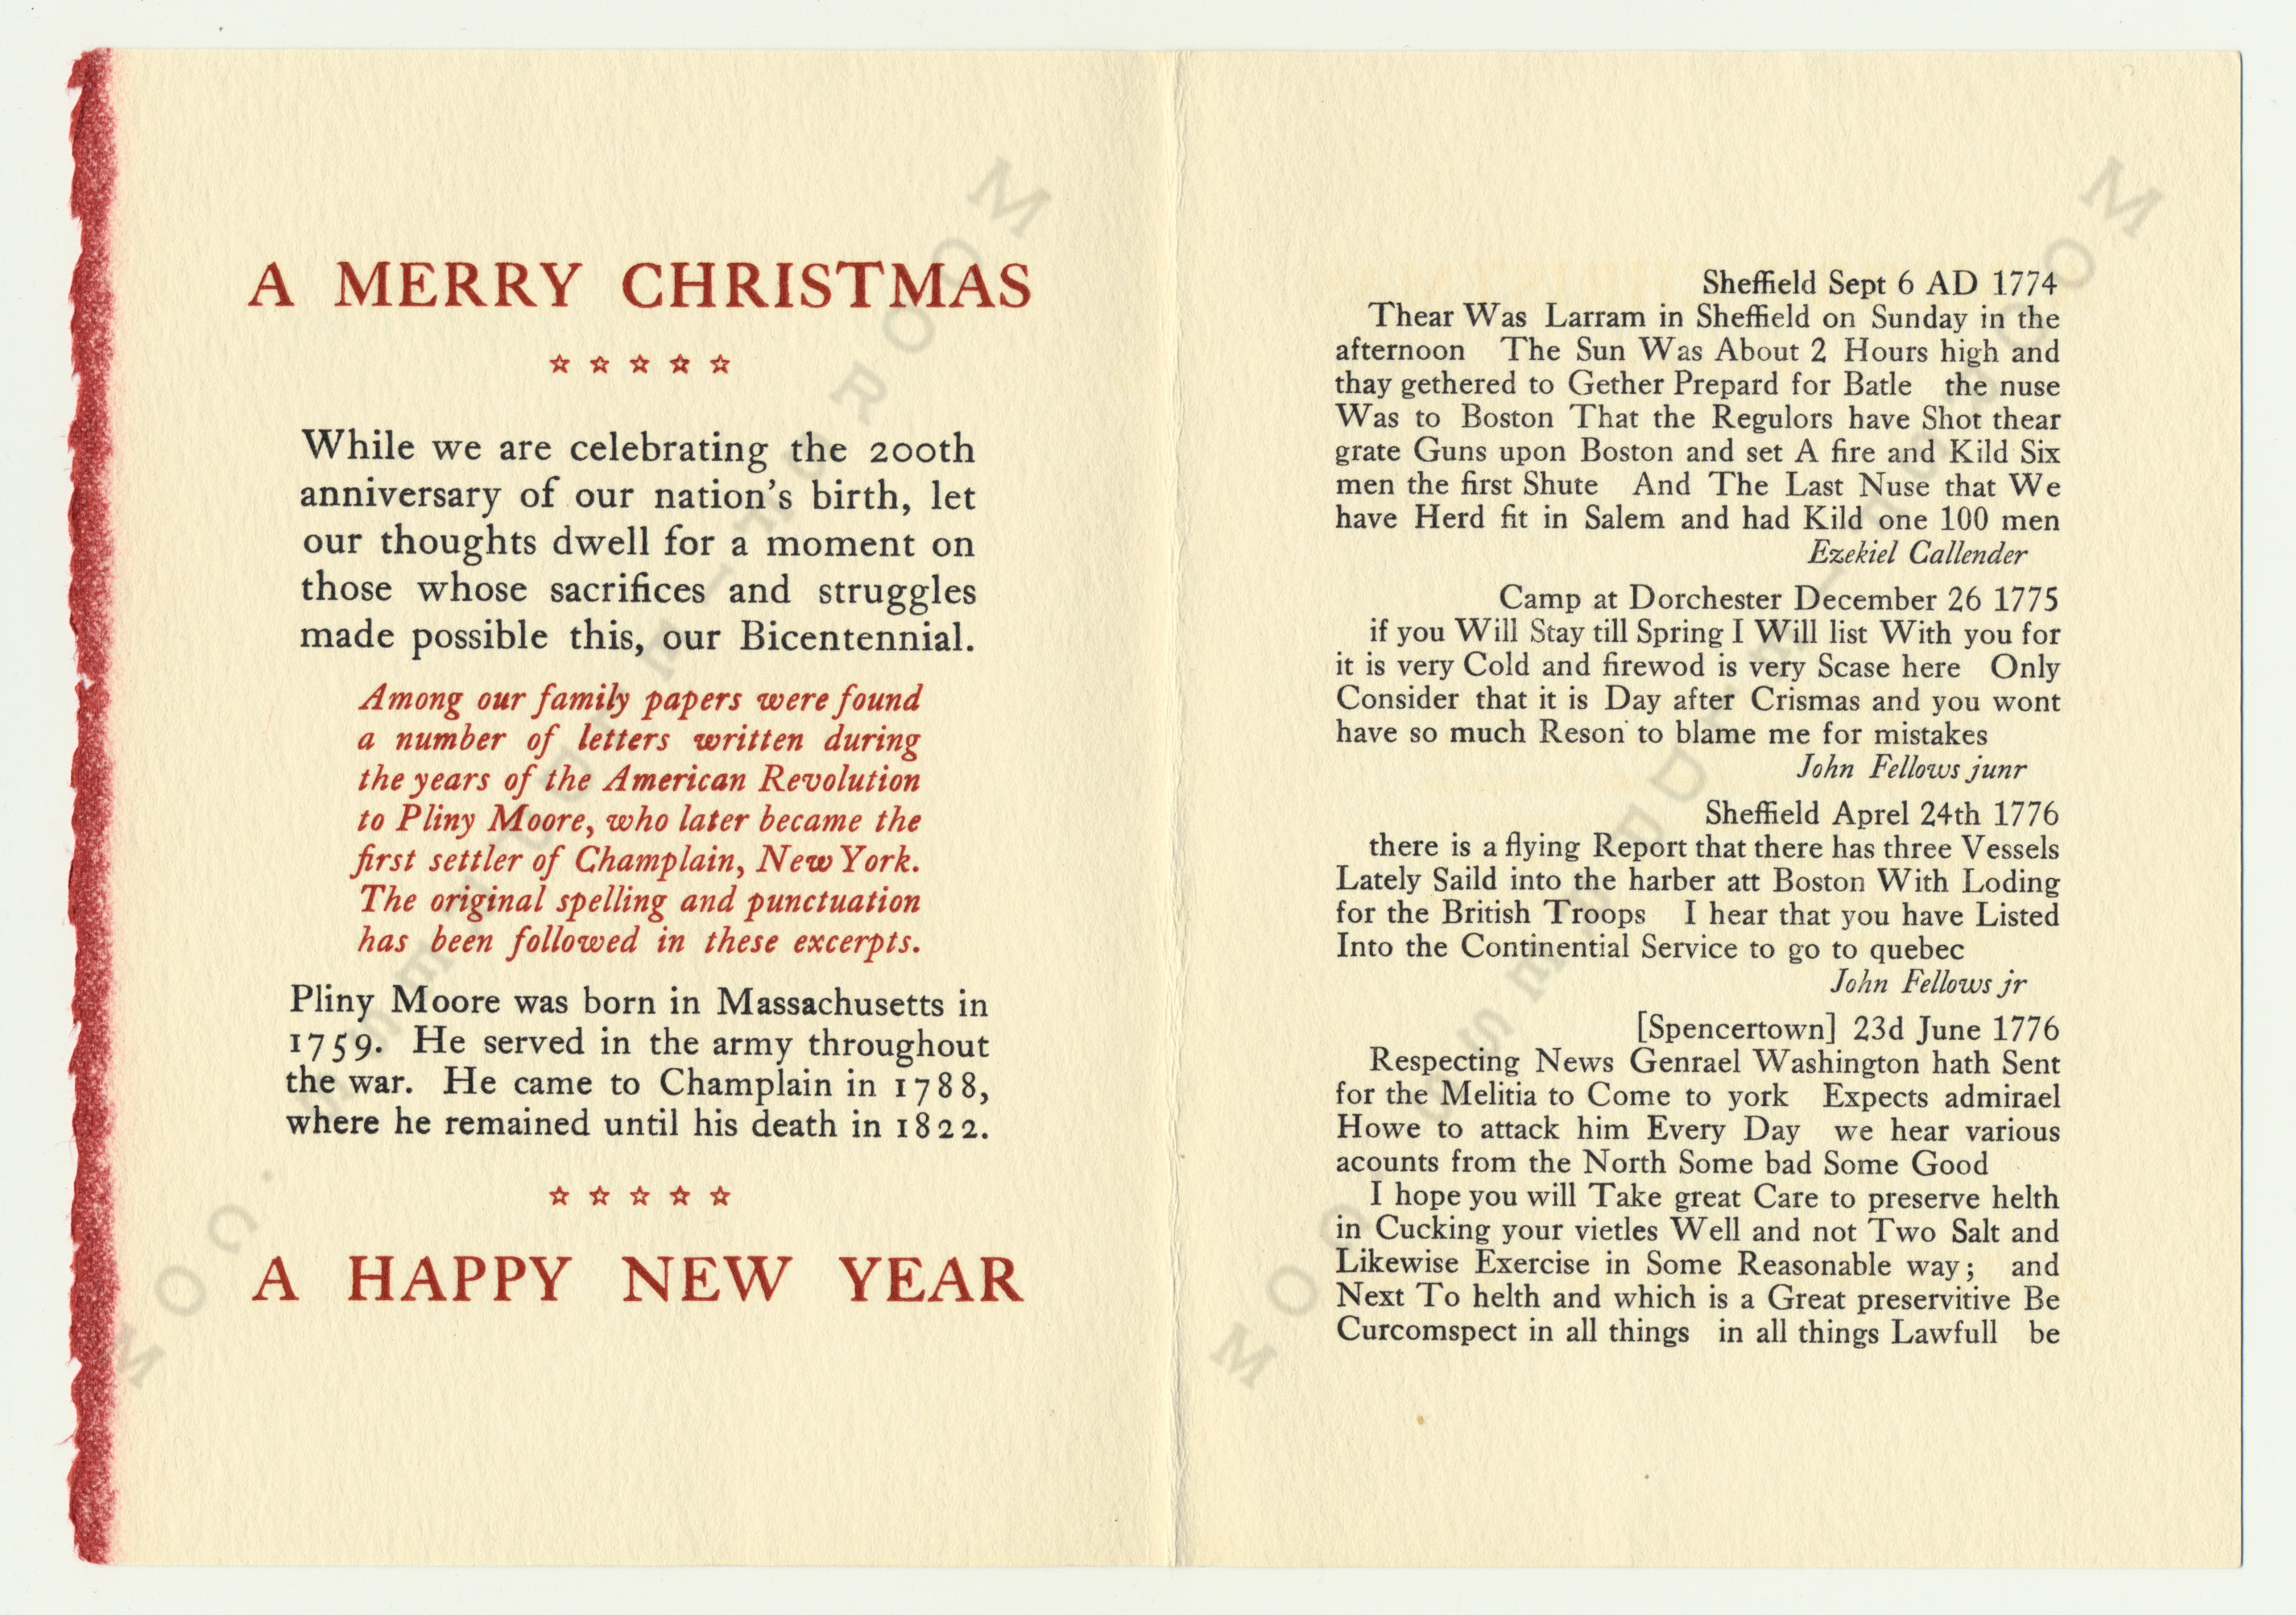 The
                      McLellan Christmas Cards printed by the Moorsfield
                      Press